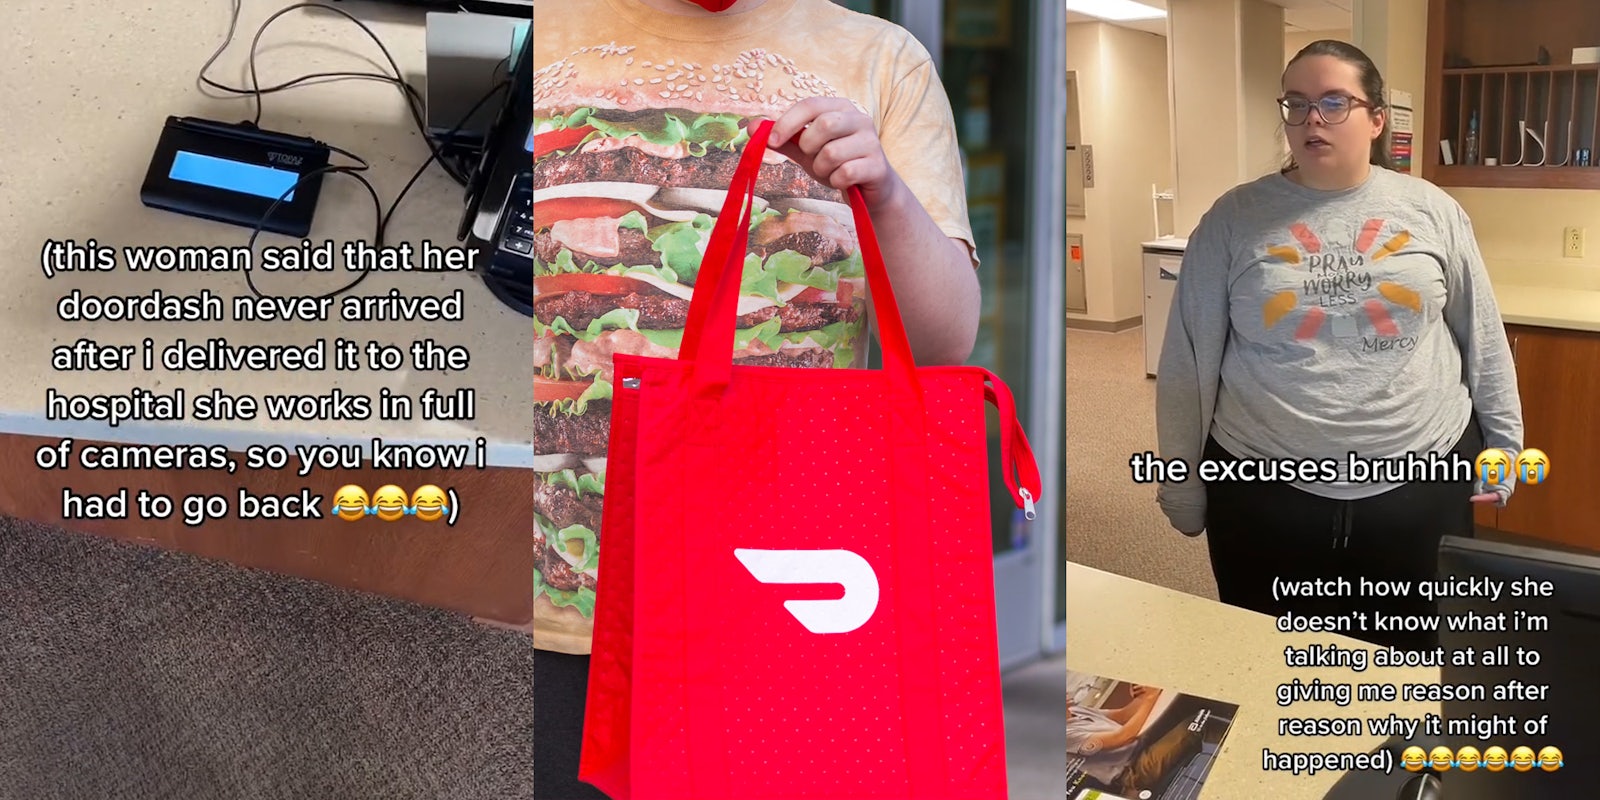 DoorDash employee at desk of hospital with caption '(this woman said her doordash never arrived after I delivered it to the hospital she works in full of cameras, so you know I had to go back' (l) DoorDash employee holding branded bag (c) hospital worker speaking with caption 'the excuses bruh (watch how quickly she doesn't know what I'm talking about at all to giving me reason after reason why it might of happened)' (r)